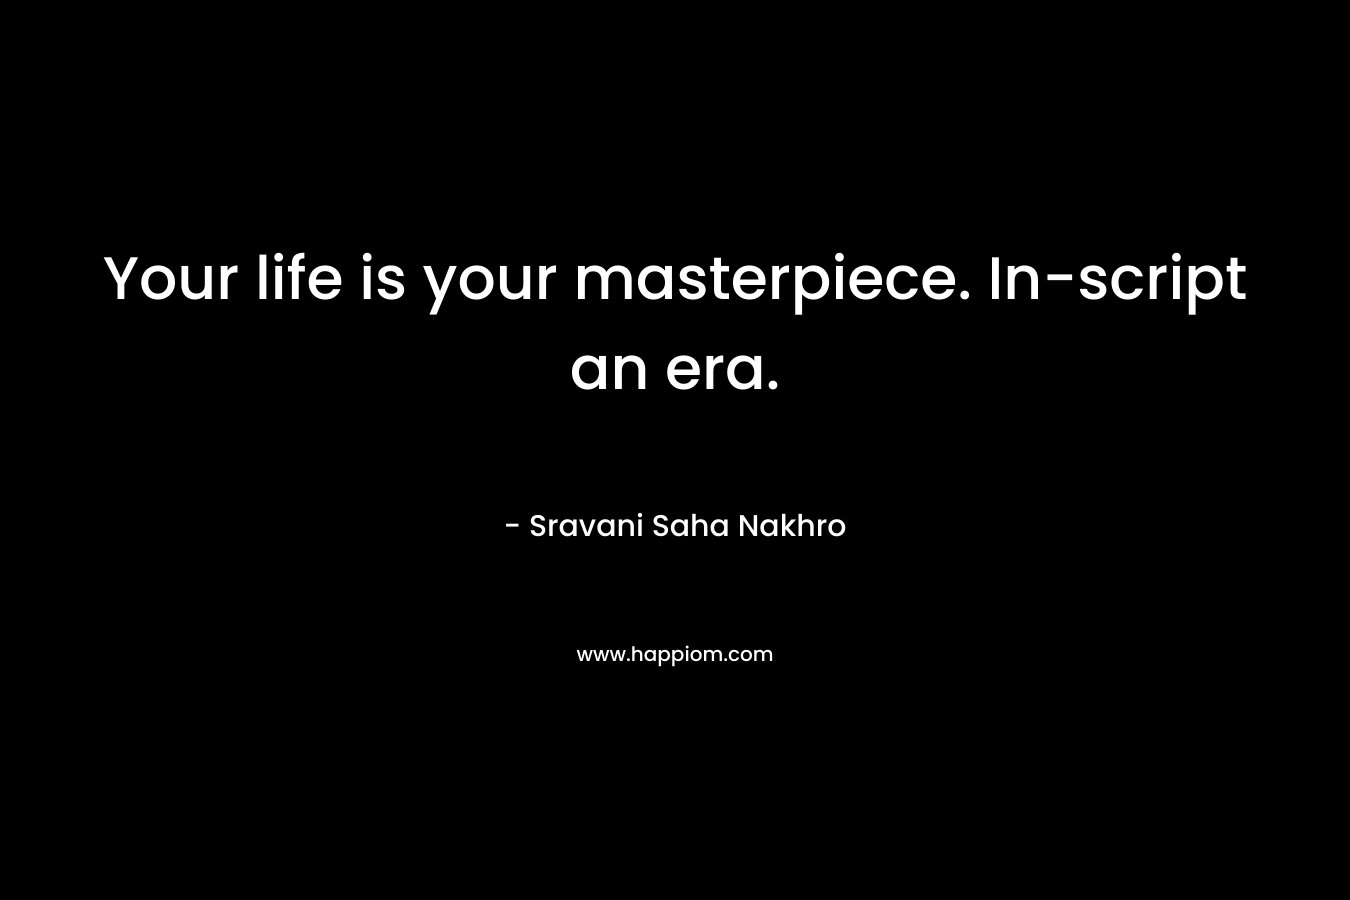 Your life is your masterpiece. In-script an era.